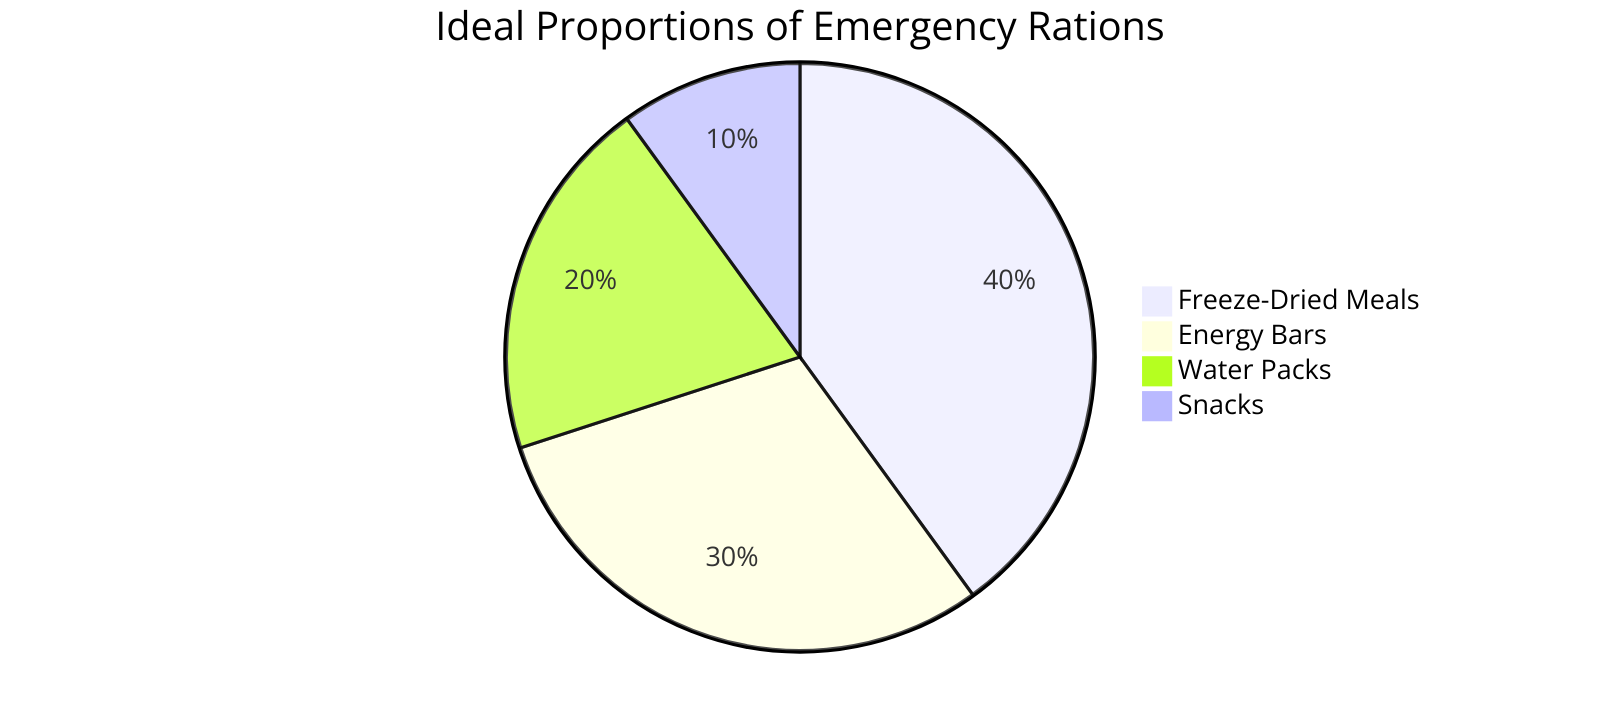  the ideal proportions of different types of emergency rations to maximize space and nutritional value